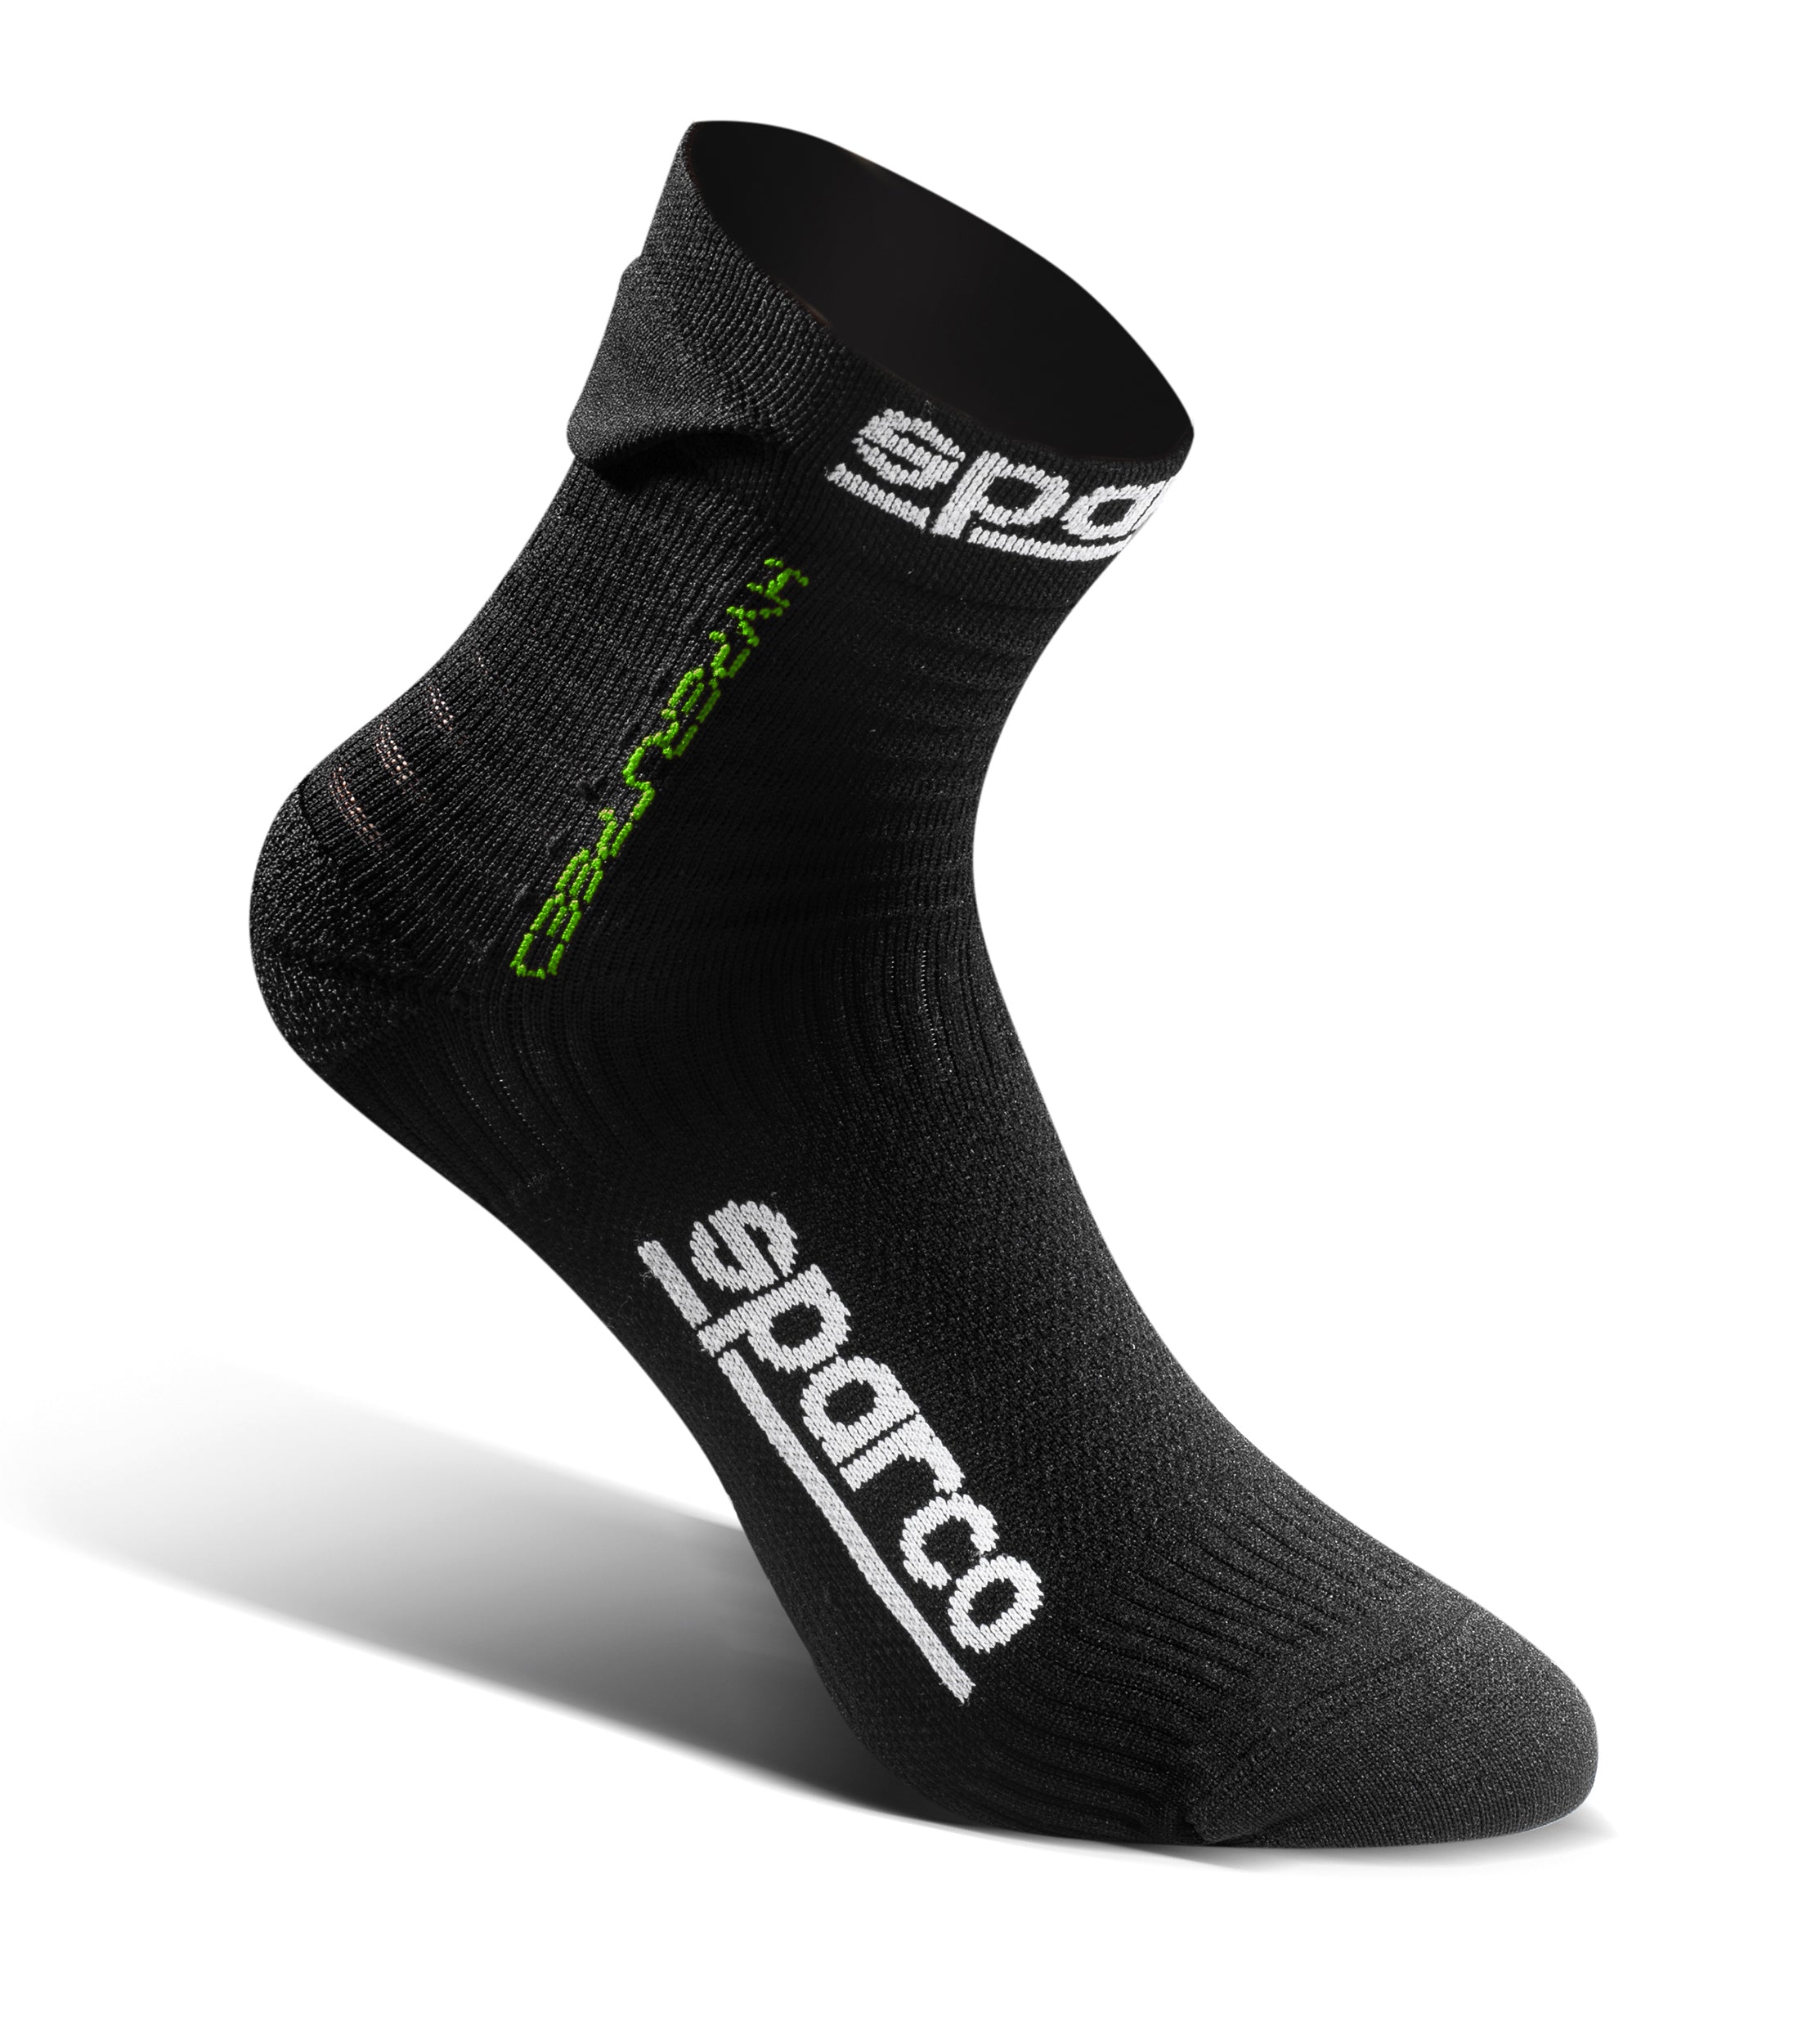 SPARCO 01290NRVF3839 Driving socks HYPERSPEED, black/green, size 38/39 Photo-0 